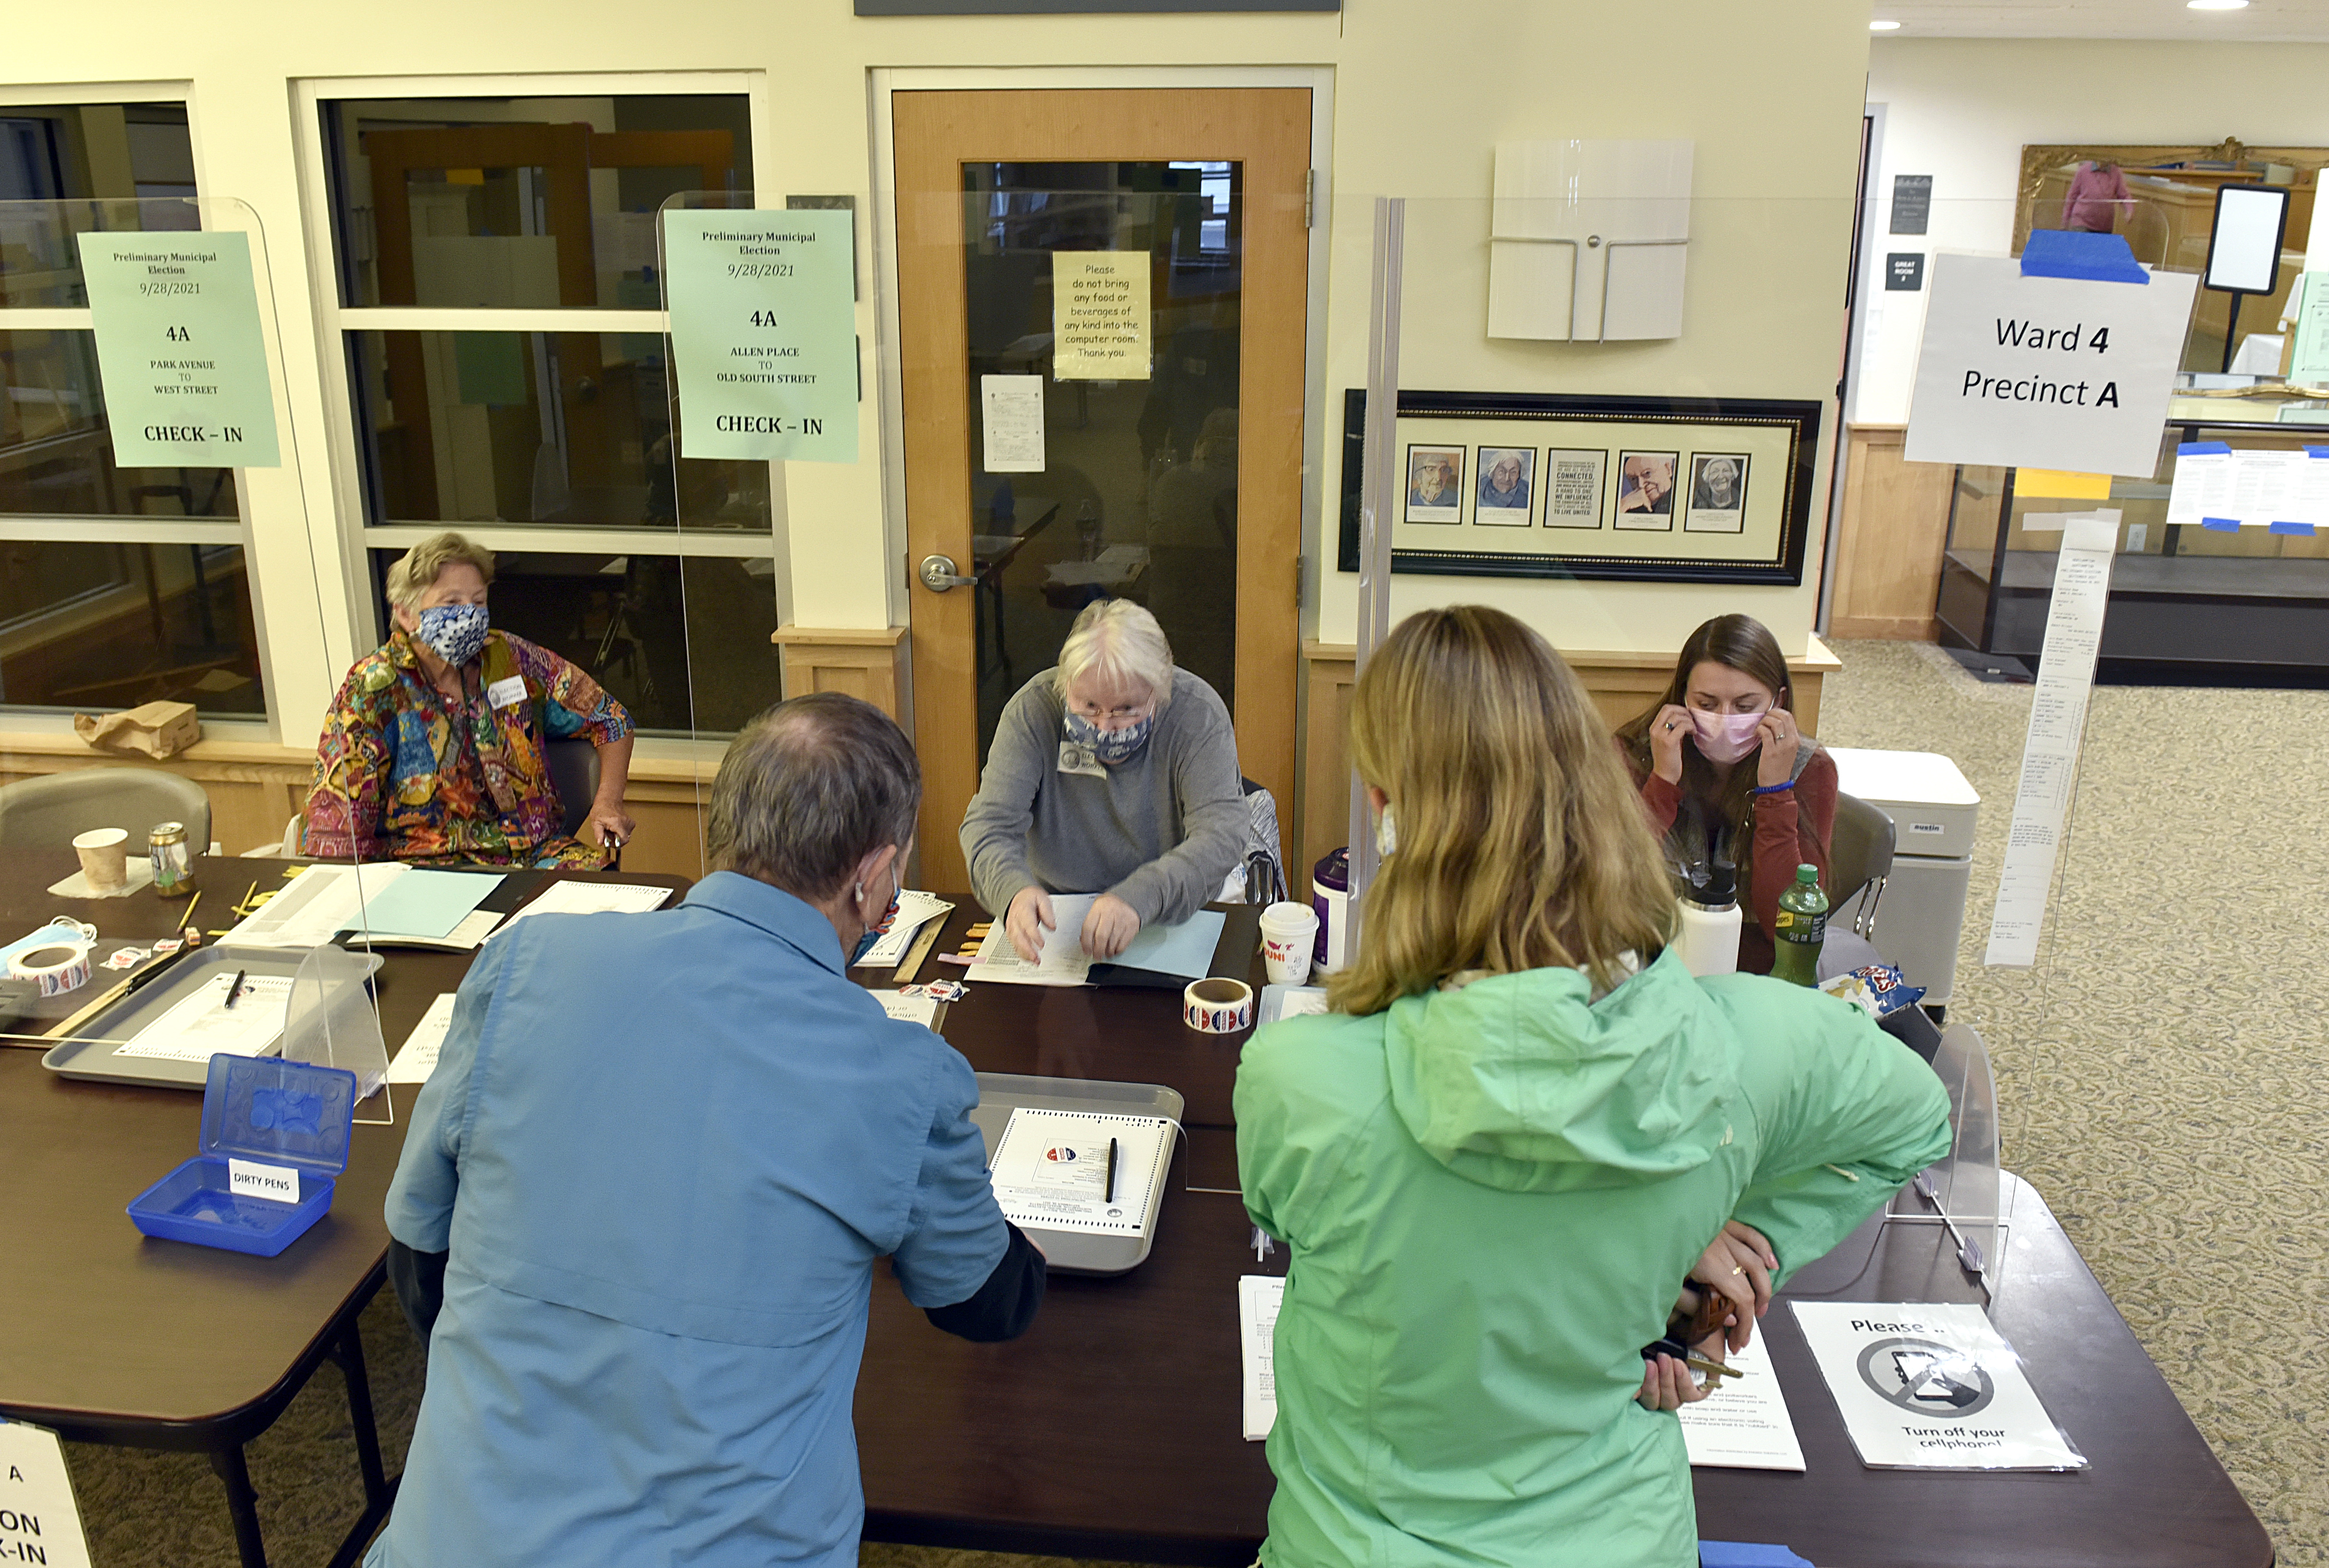 Voters at the senior center check in to cast ballots in the Northampton preliminary election, September 28, 2021.  (Don Treeger / The Republican)